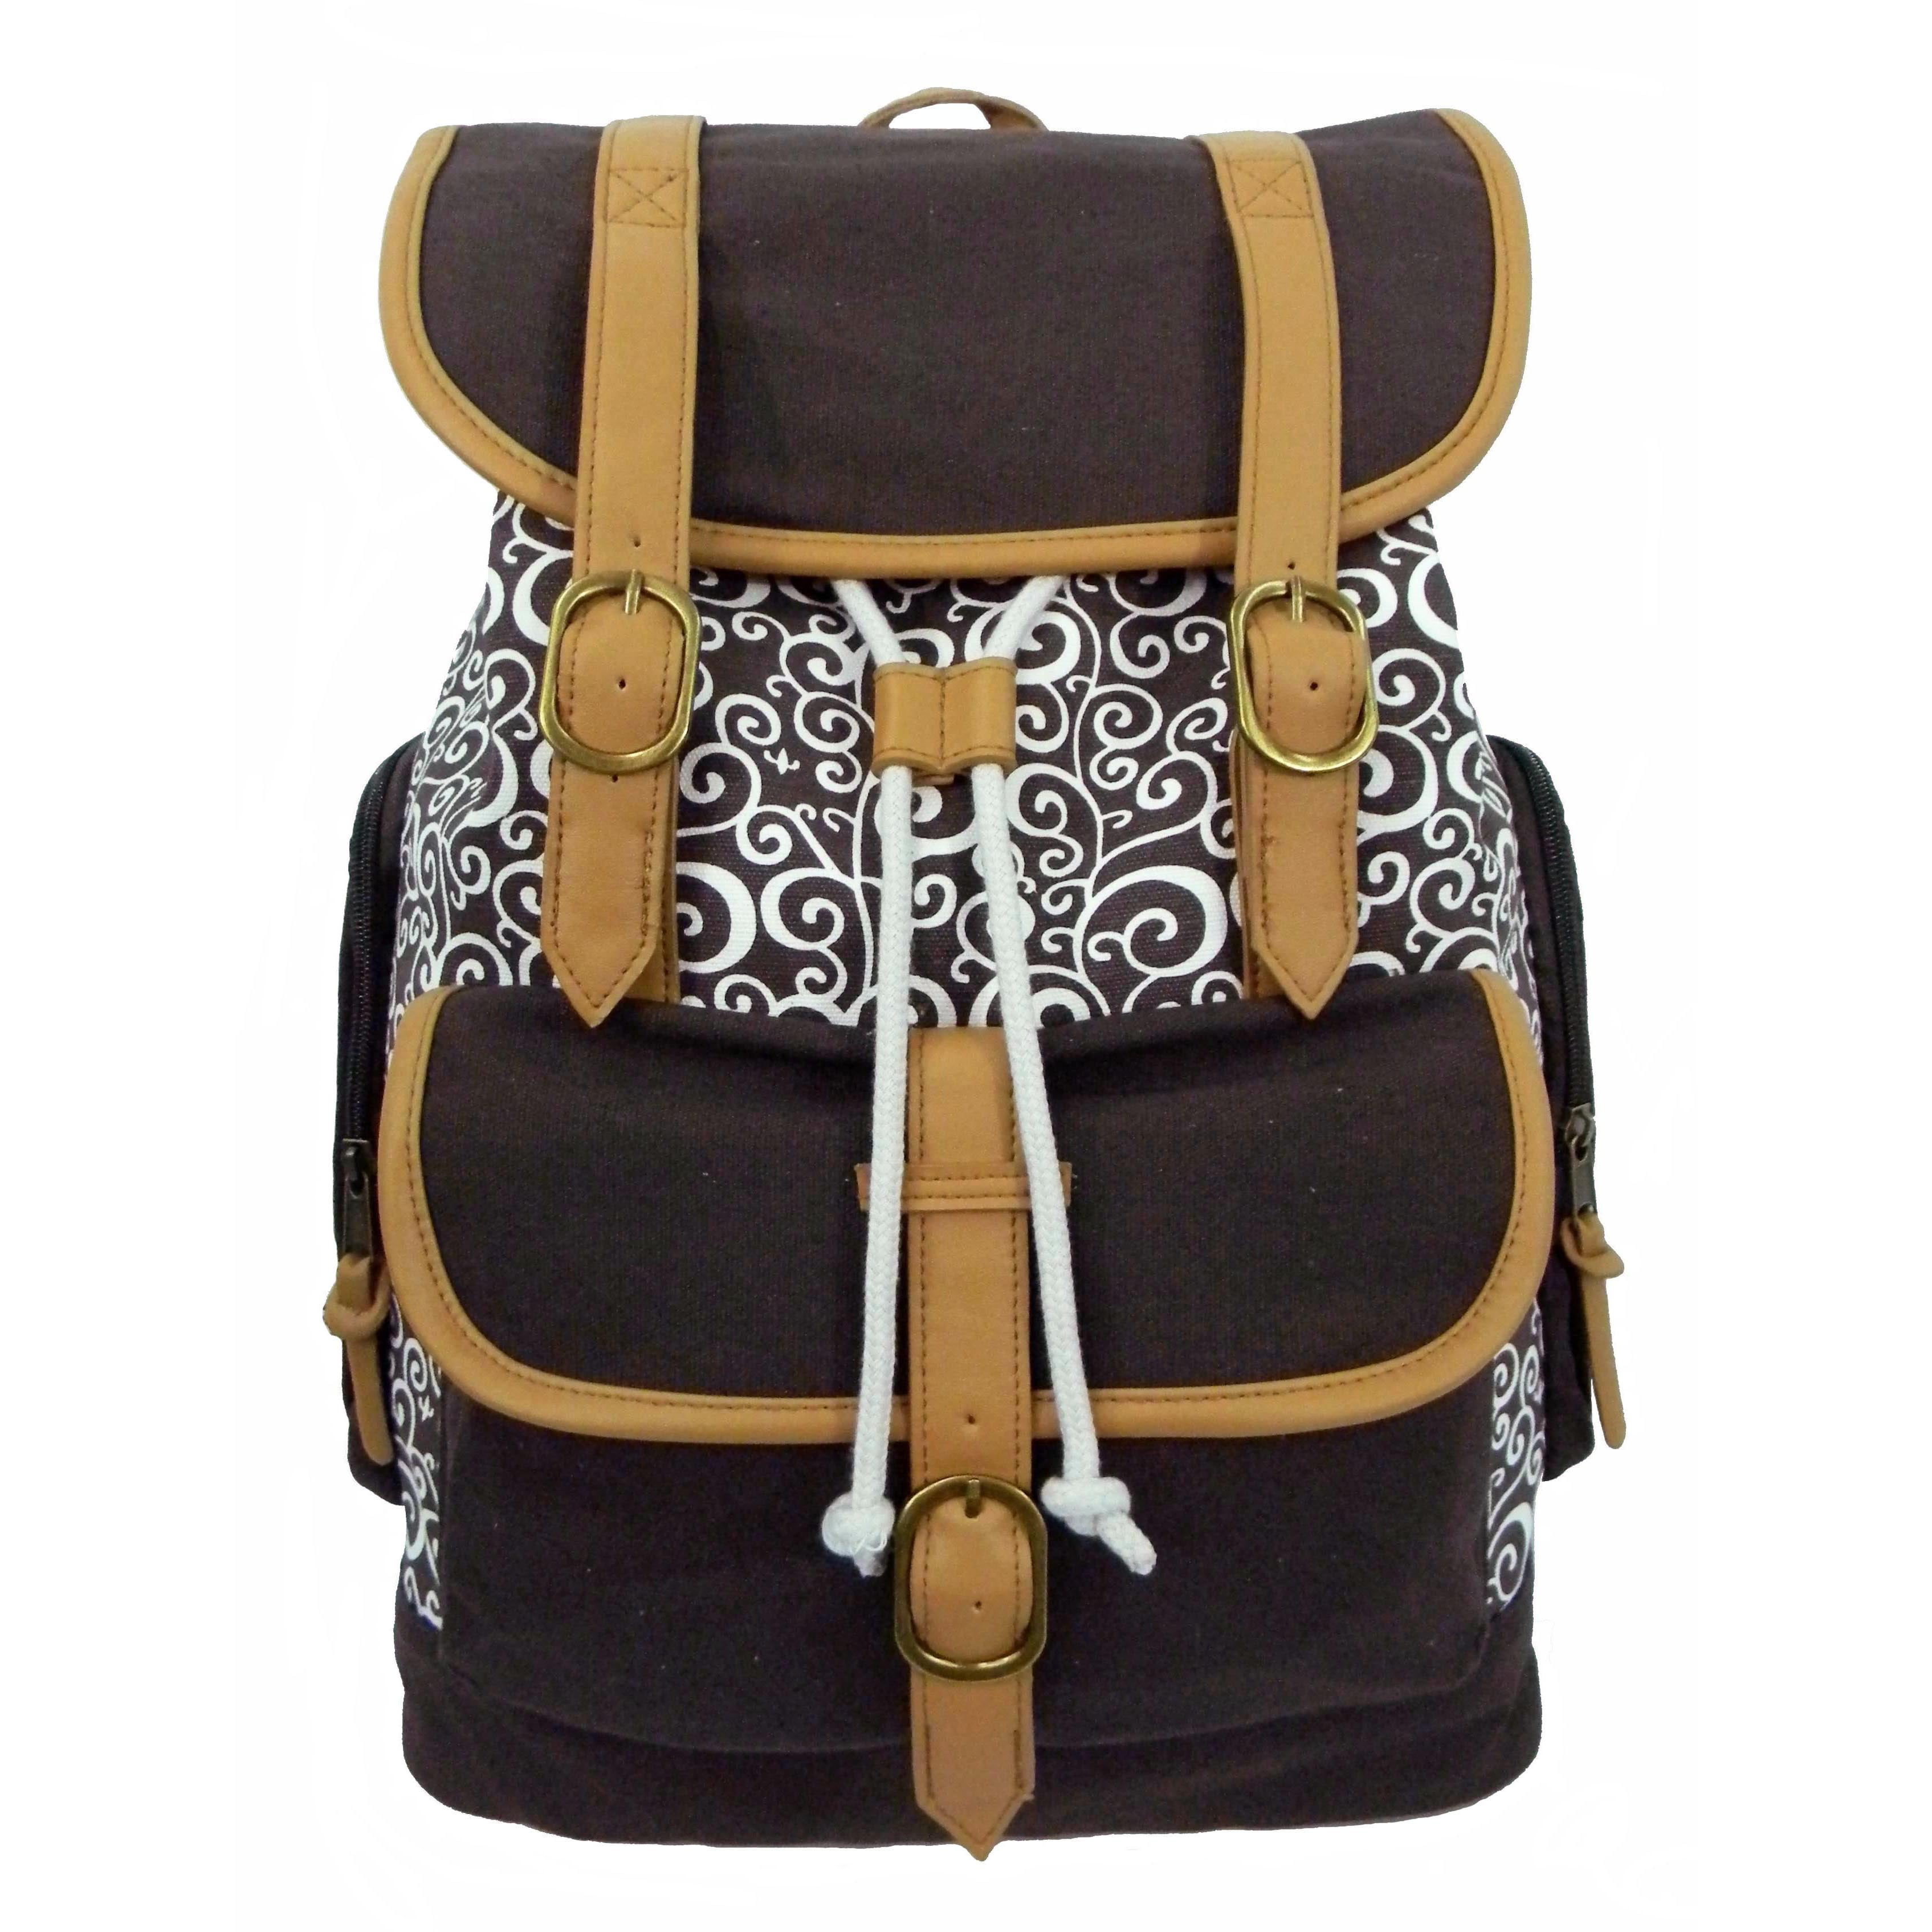 Grayson Cotton Canvas Backpack Monogrammed Laptop Backpack